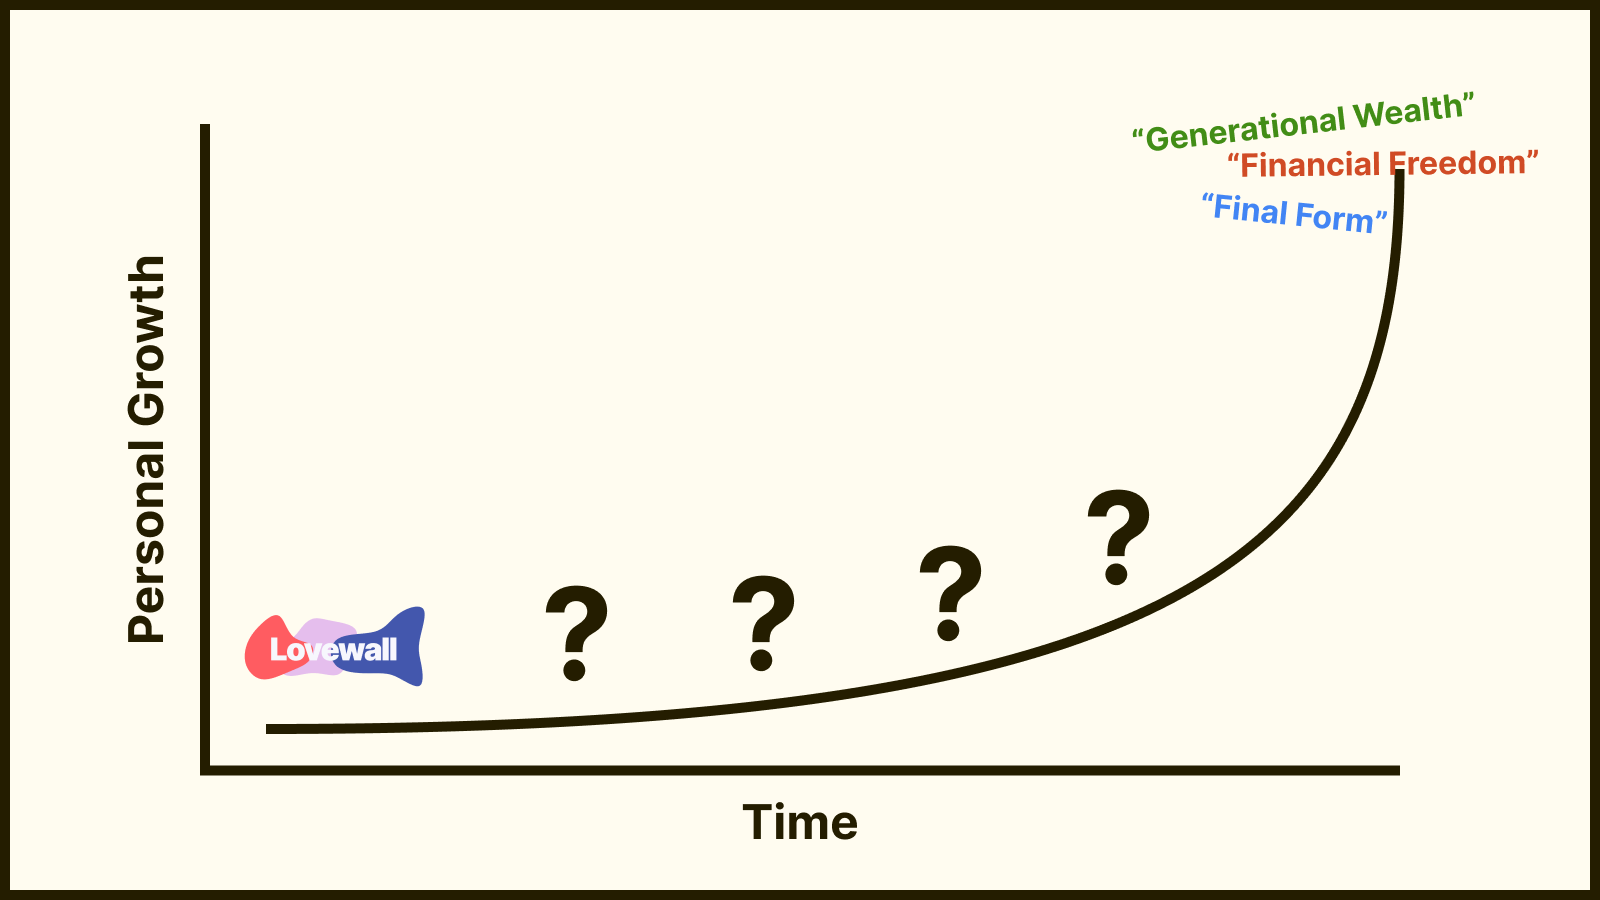 Personal Growth graph